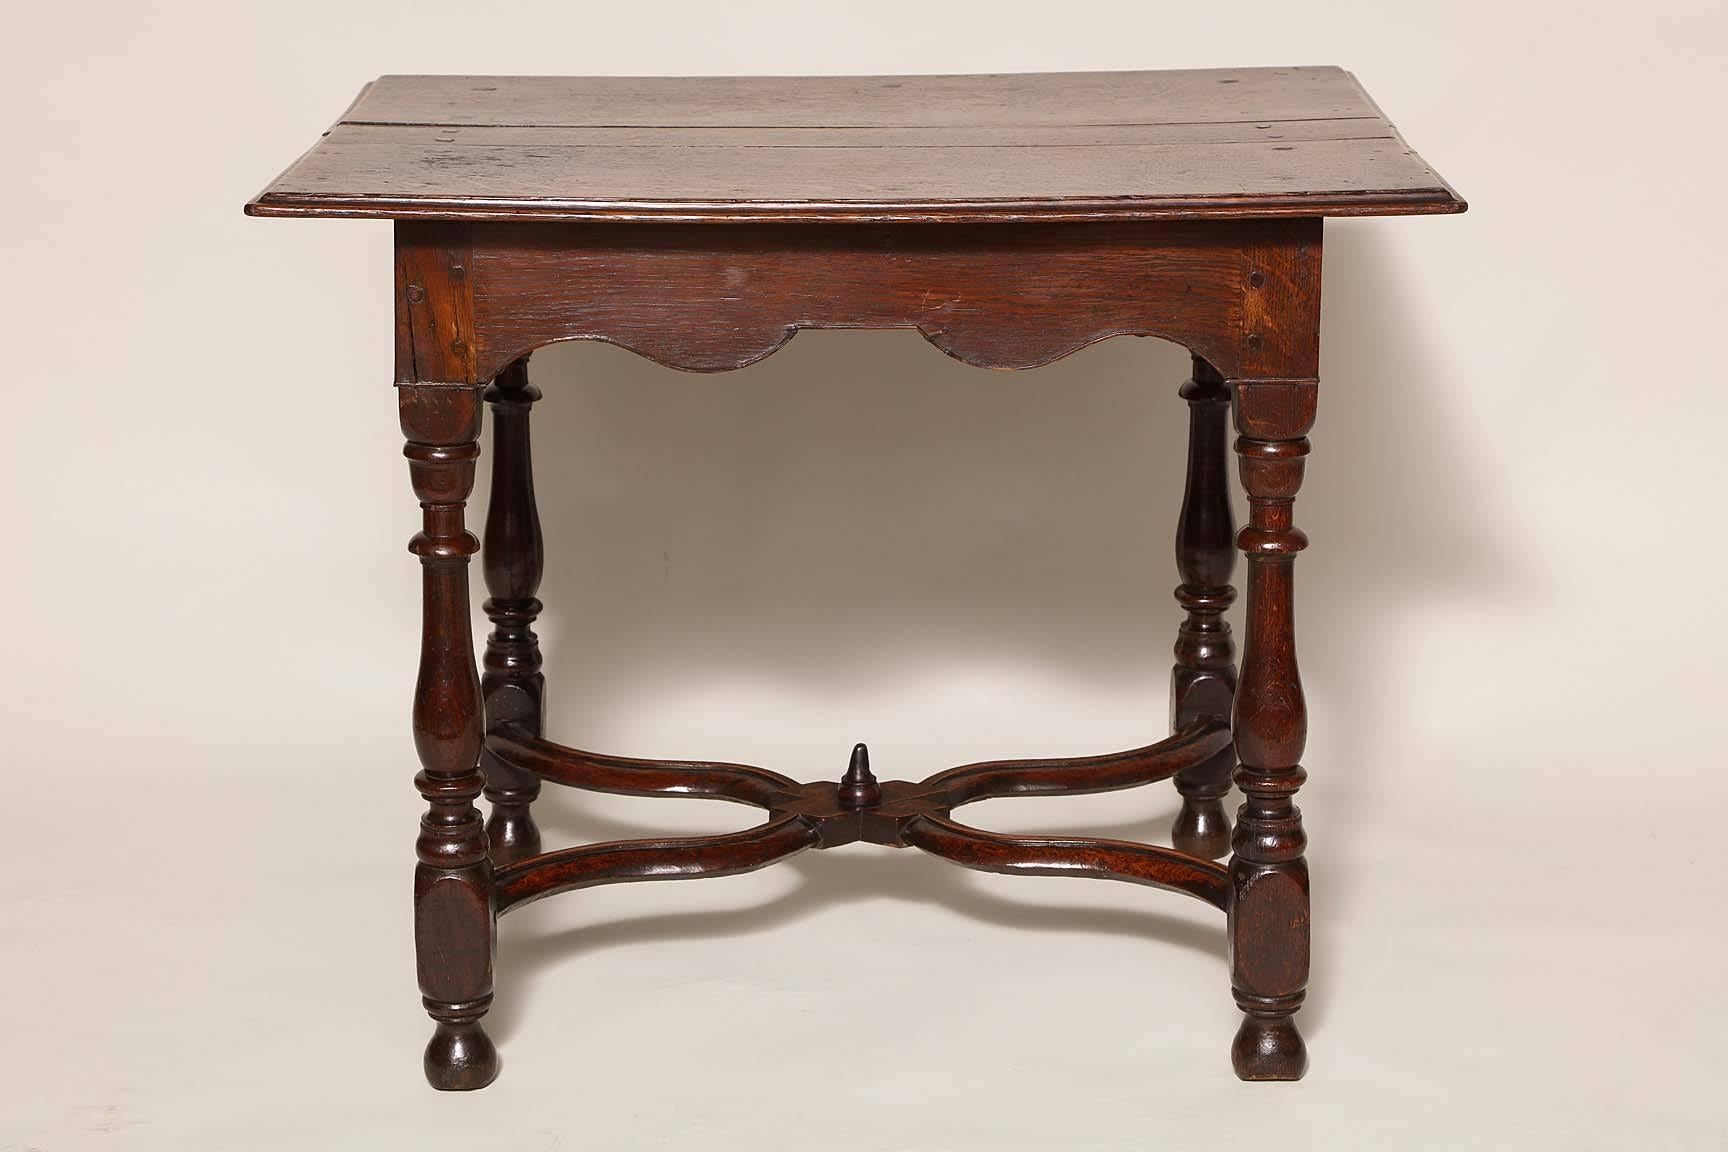 Very fine William and Mary period oak center table, the two plank top with ogee molded edge, over scalloped apron with applied edge, standing on balustrade turned legs joined by wavy 